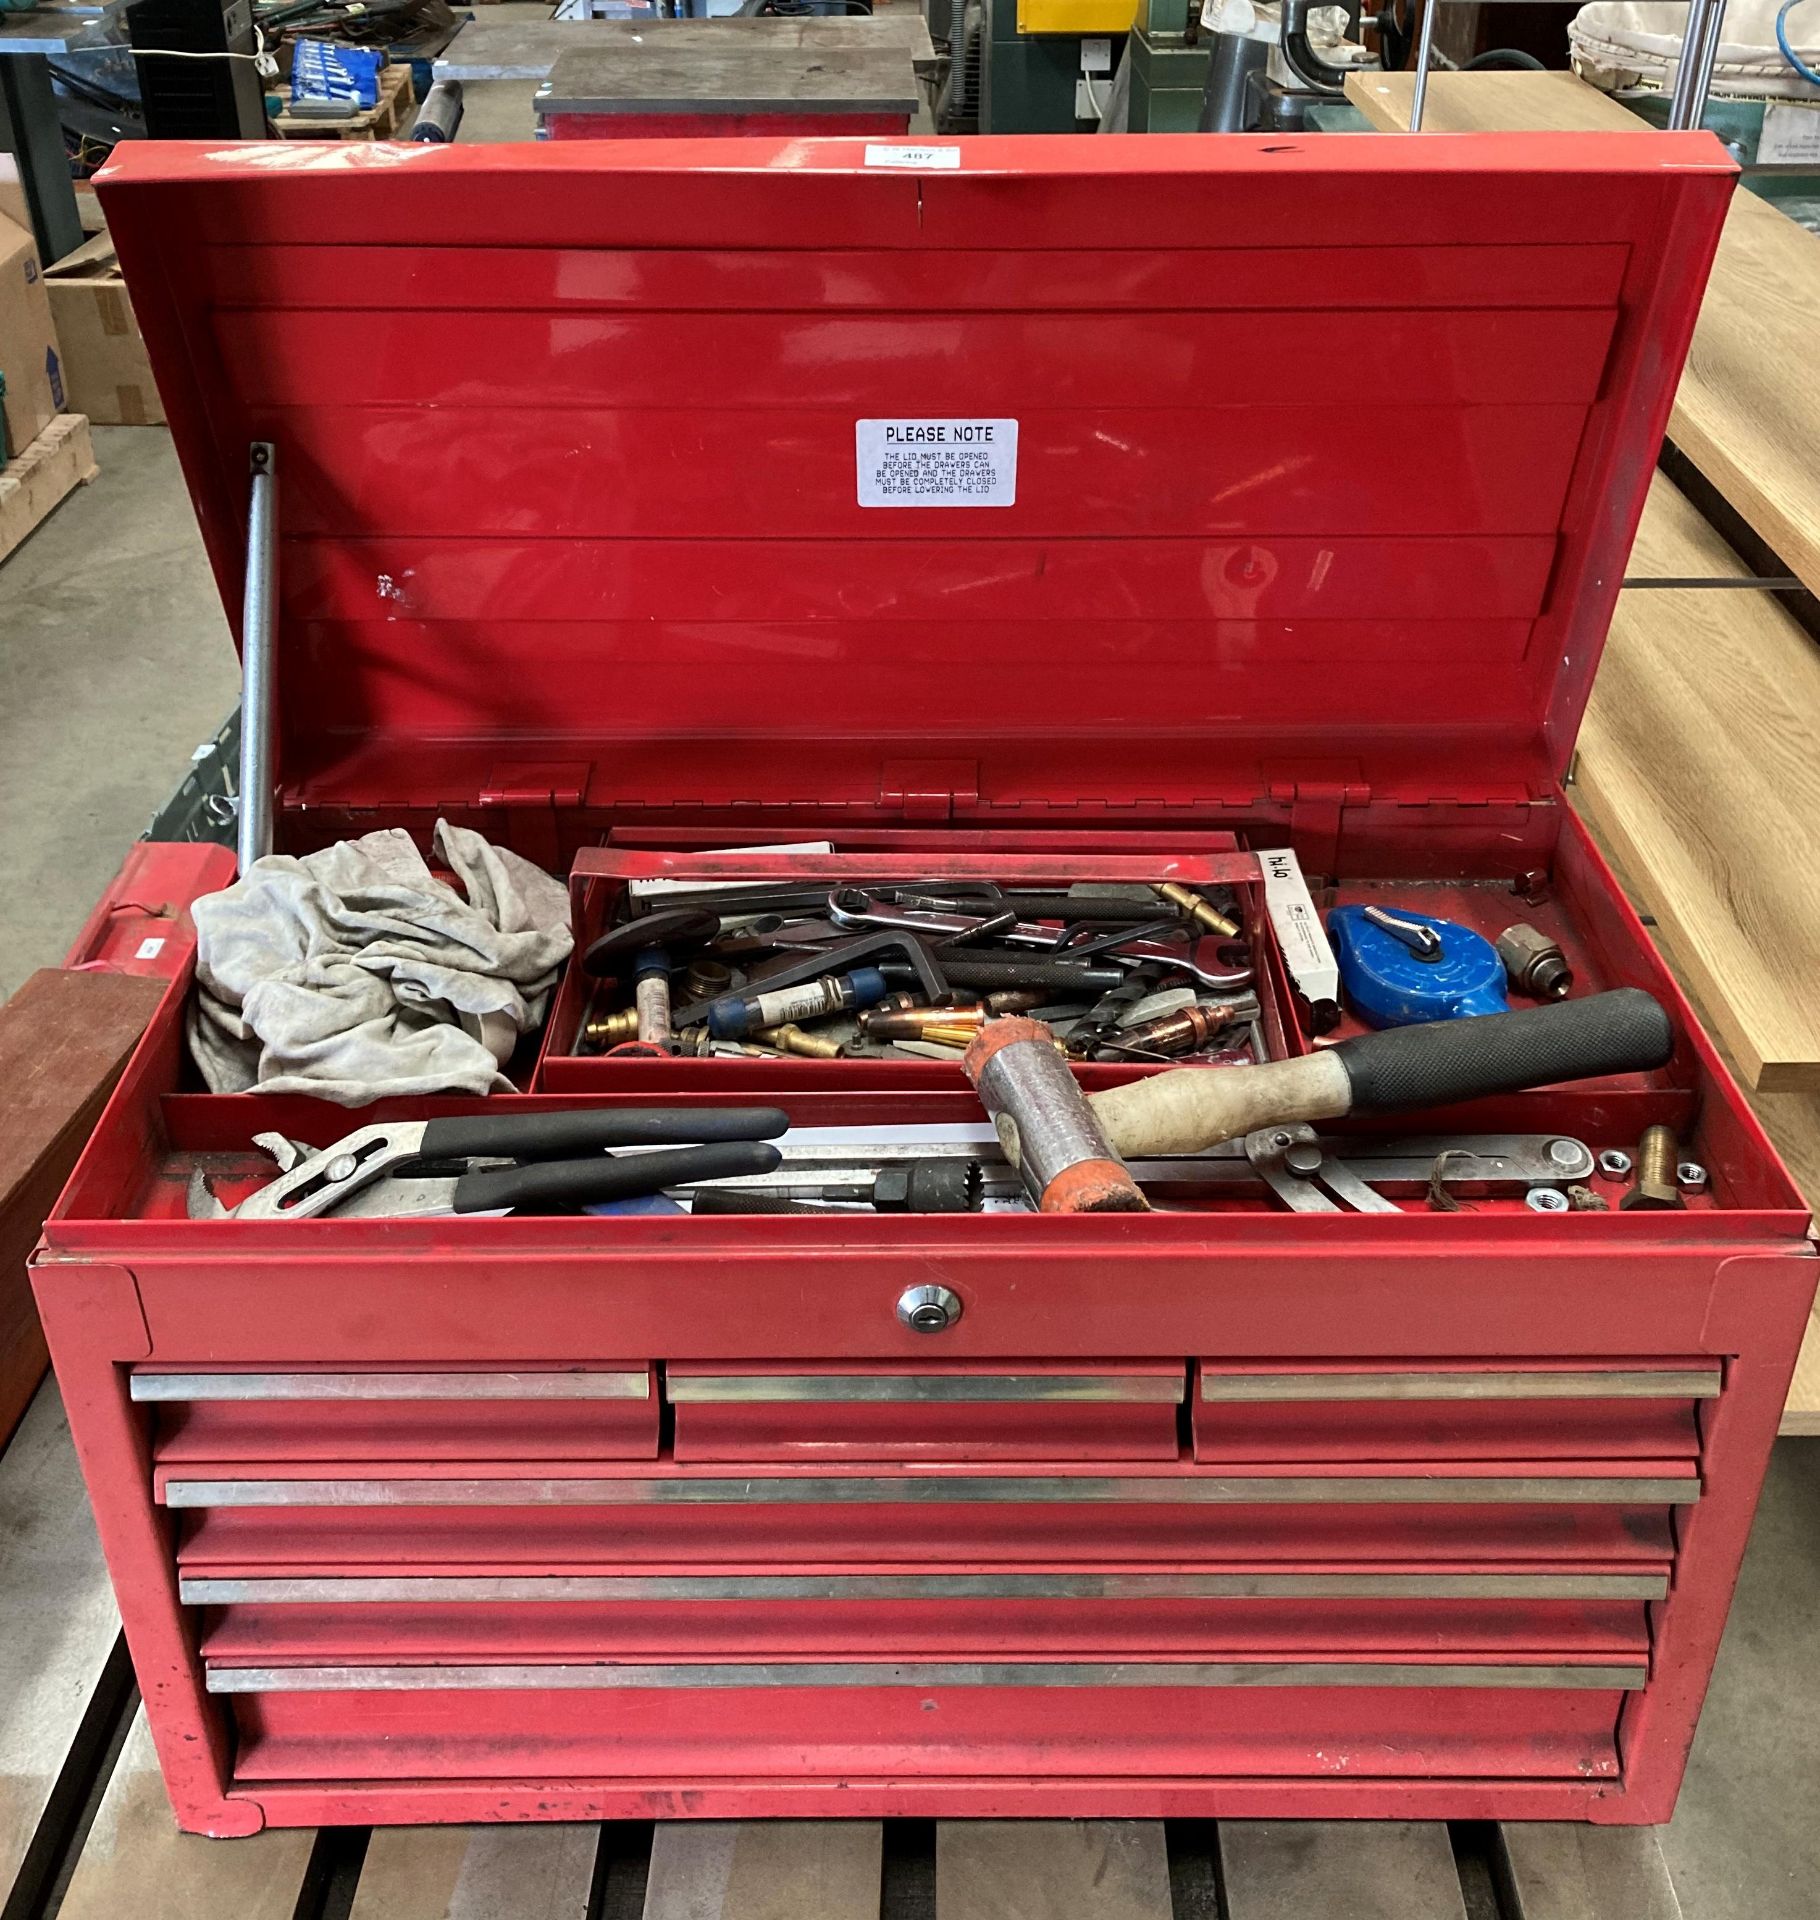 Red metal six-drawer with lift top tool box with carrying handles and contents - assorted hand